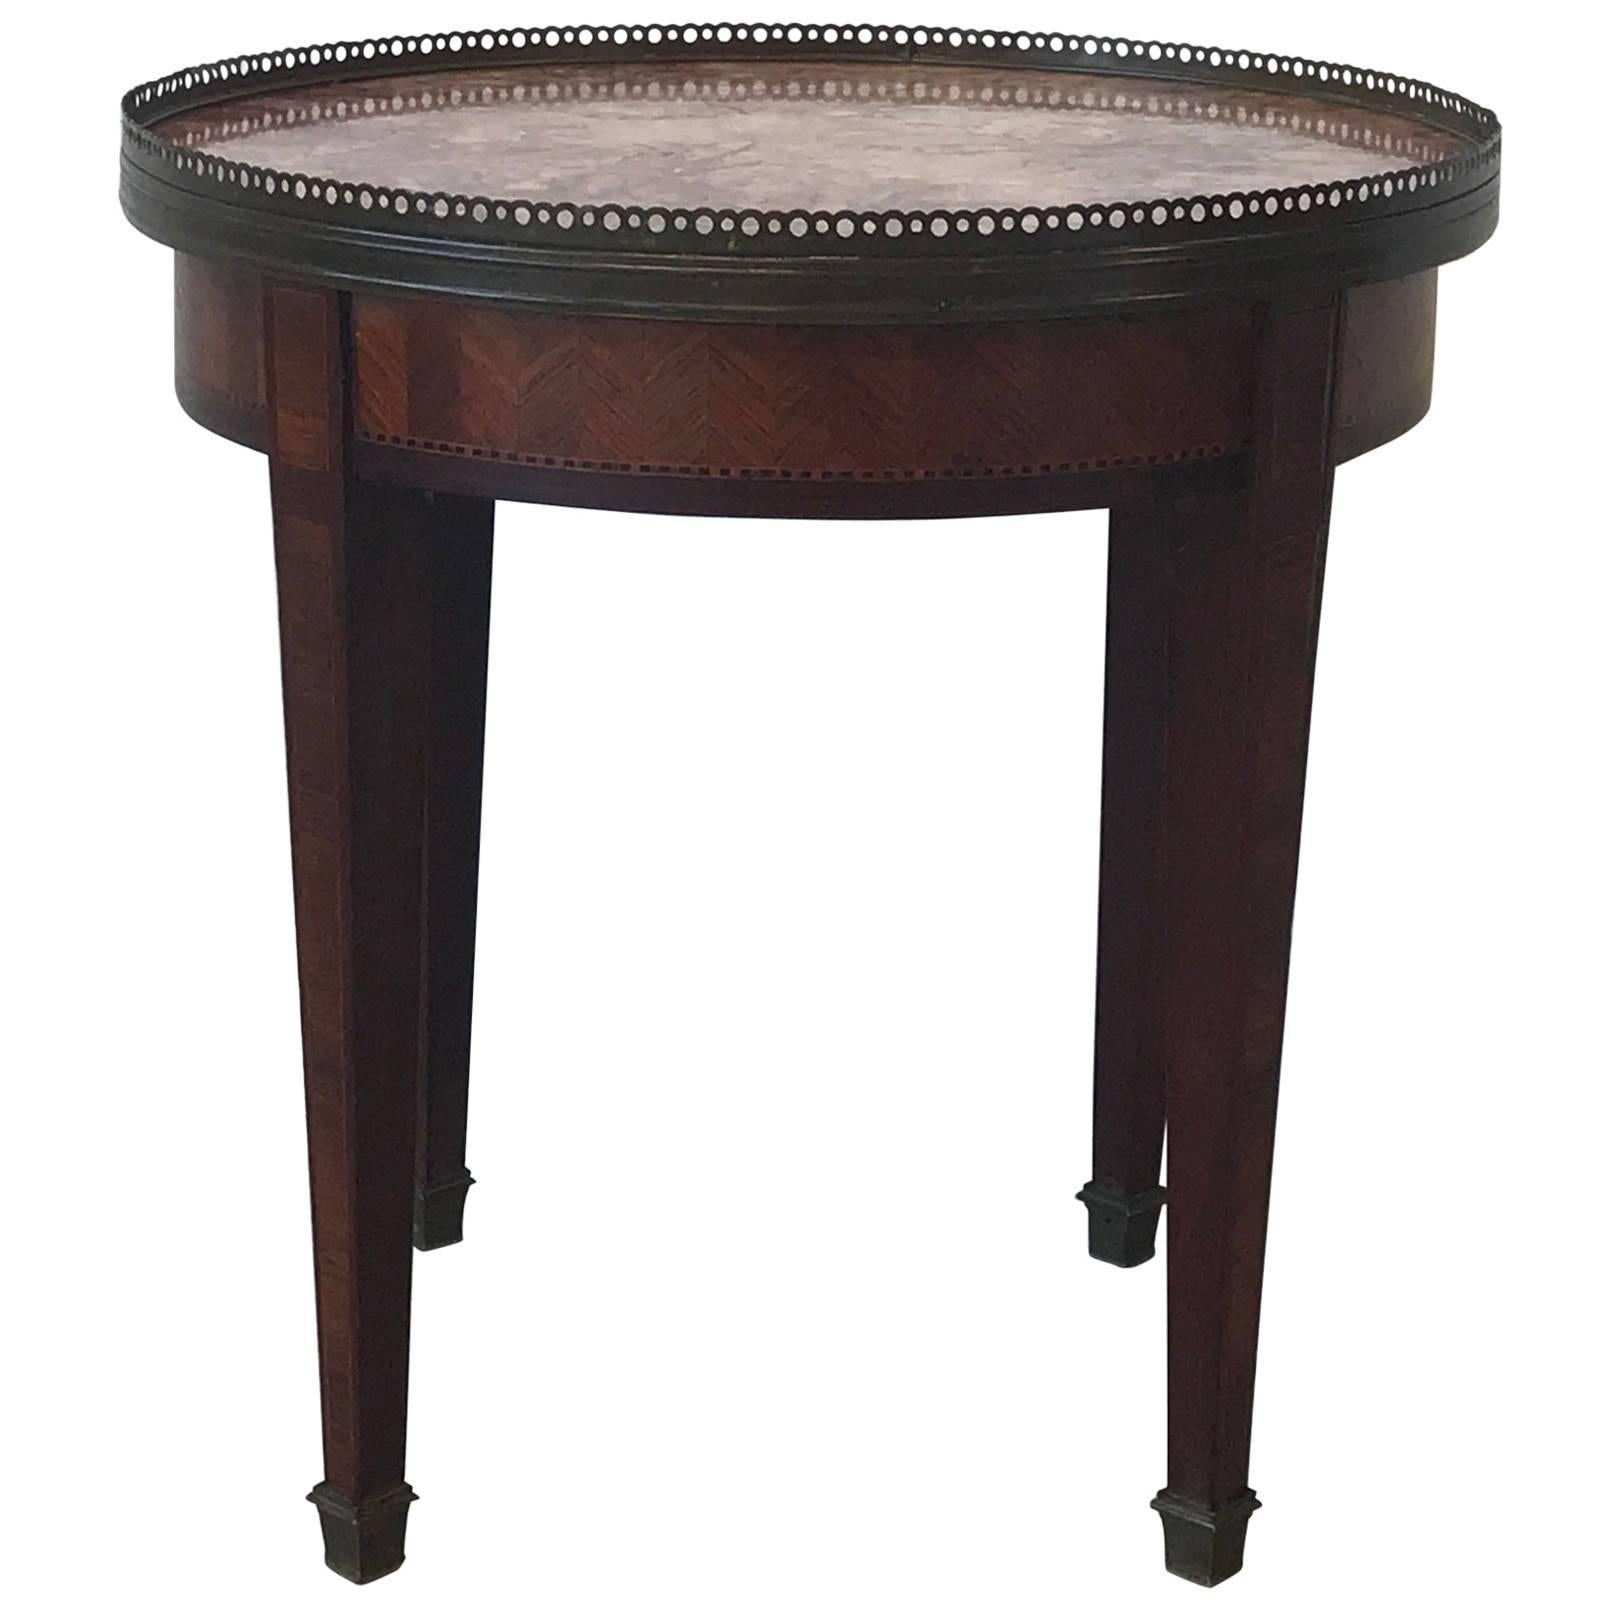 19th Century French Marquetry Guideron Table with Marble Top and Brass Accents